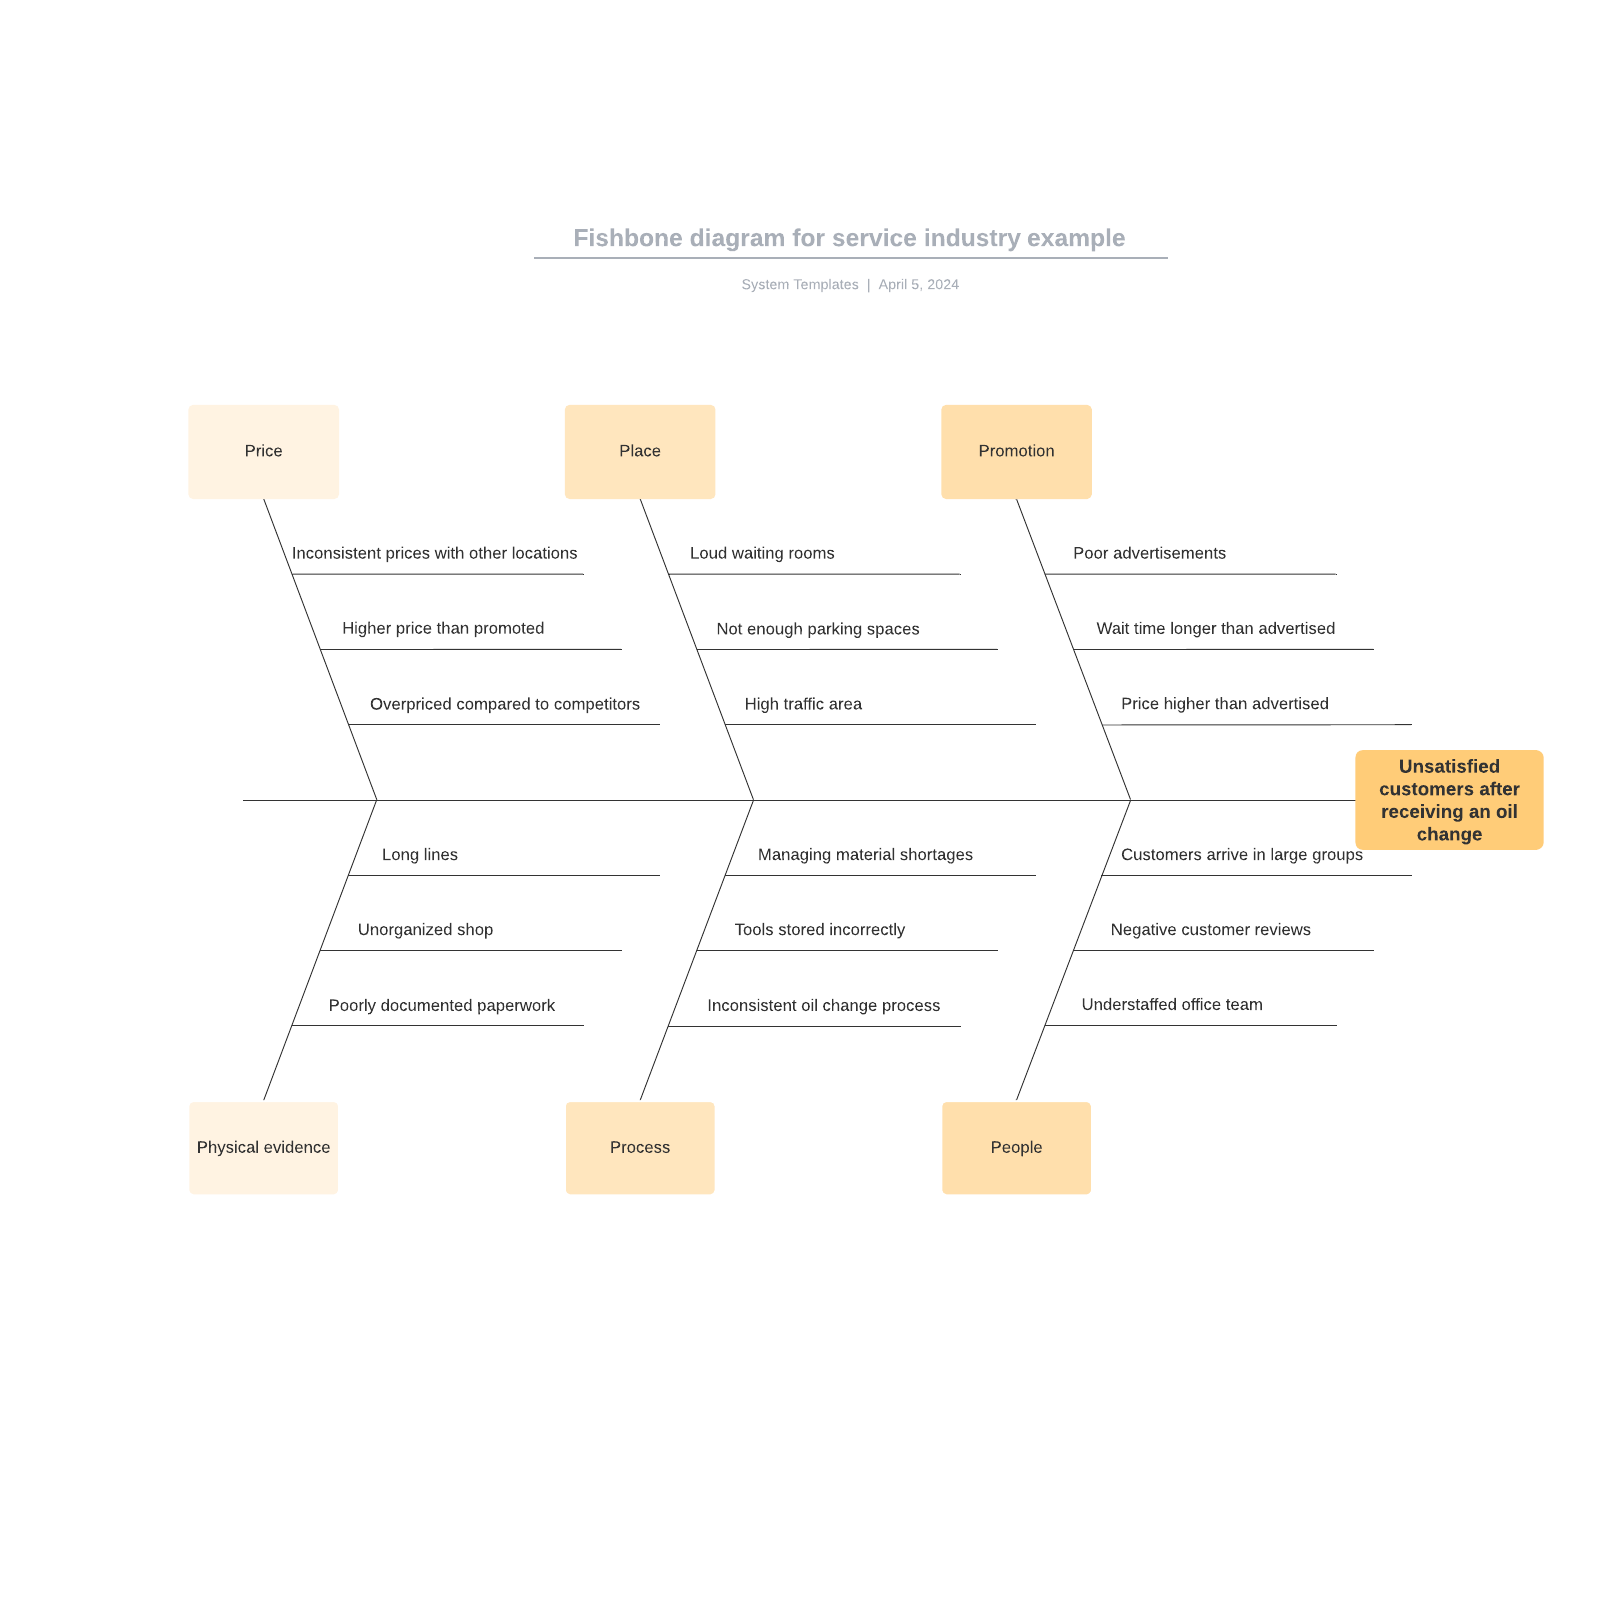 Fishbone diagram for service industry example example